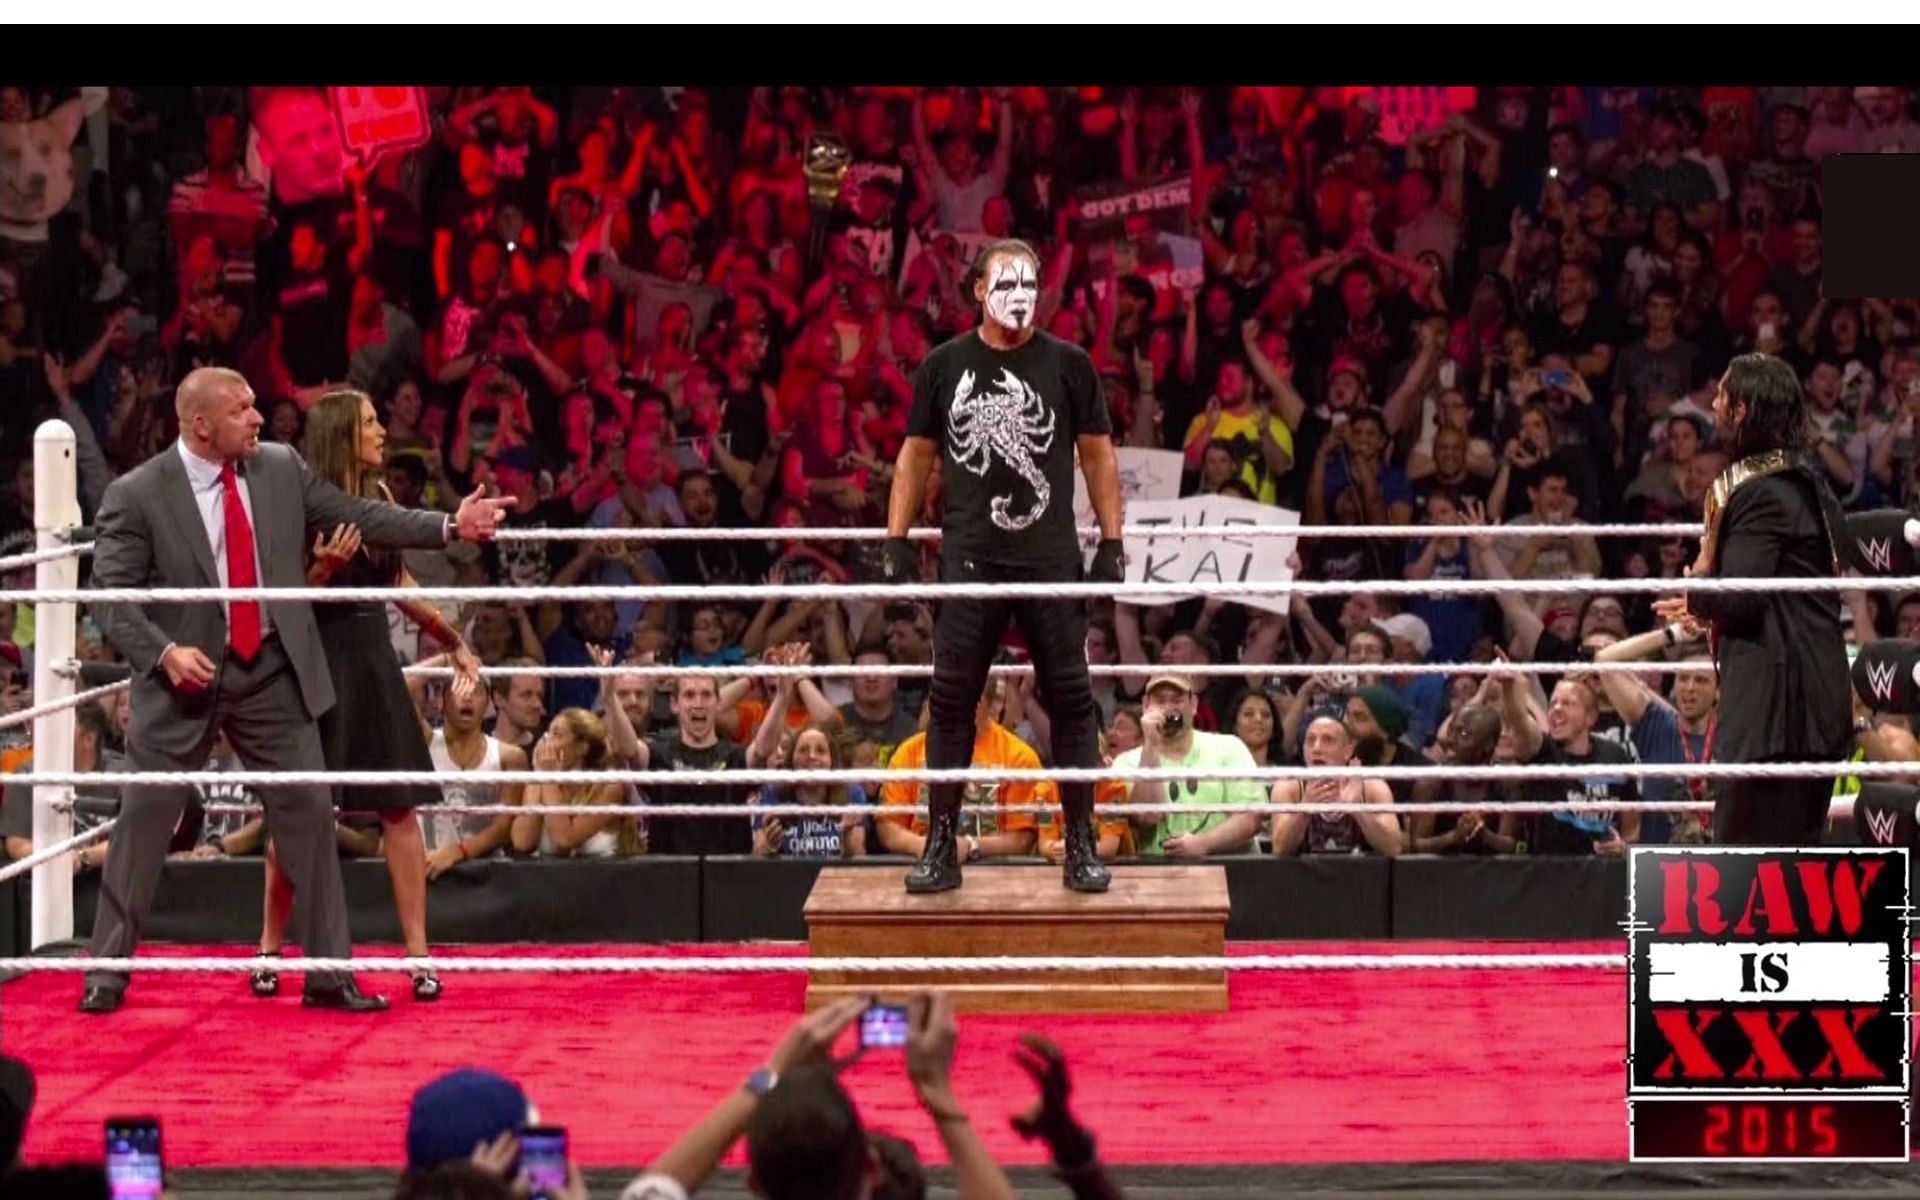 Sting&#039;s legendary WWE appearance was featured on RAW is XXX